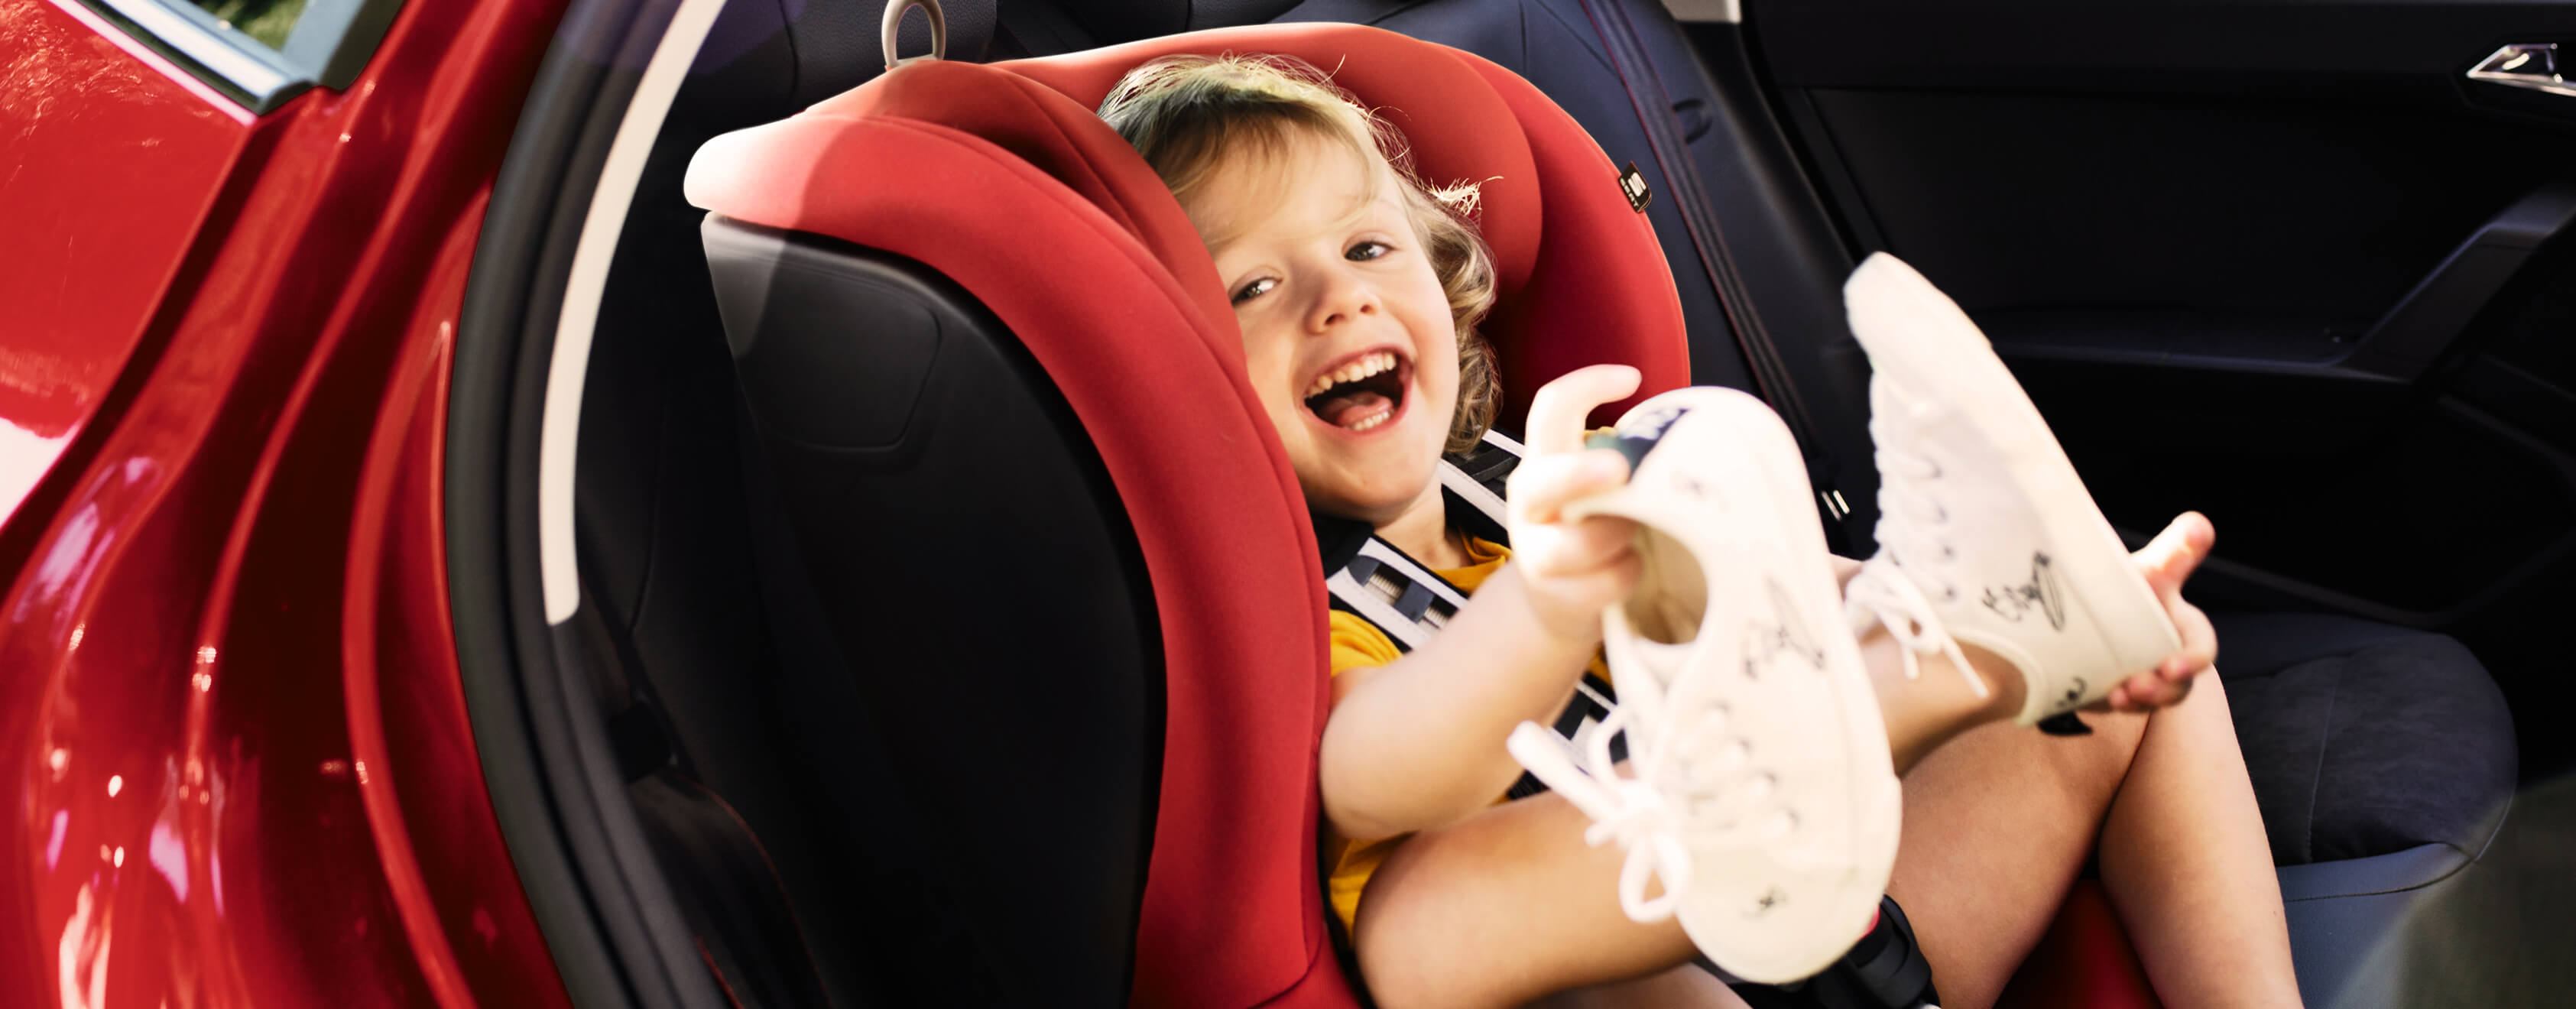 SEAT new car services and maintenance – laughing smiling child in the child seat of a SEAT new car